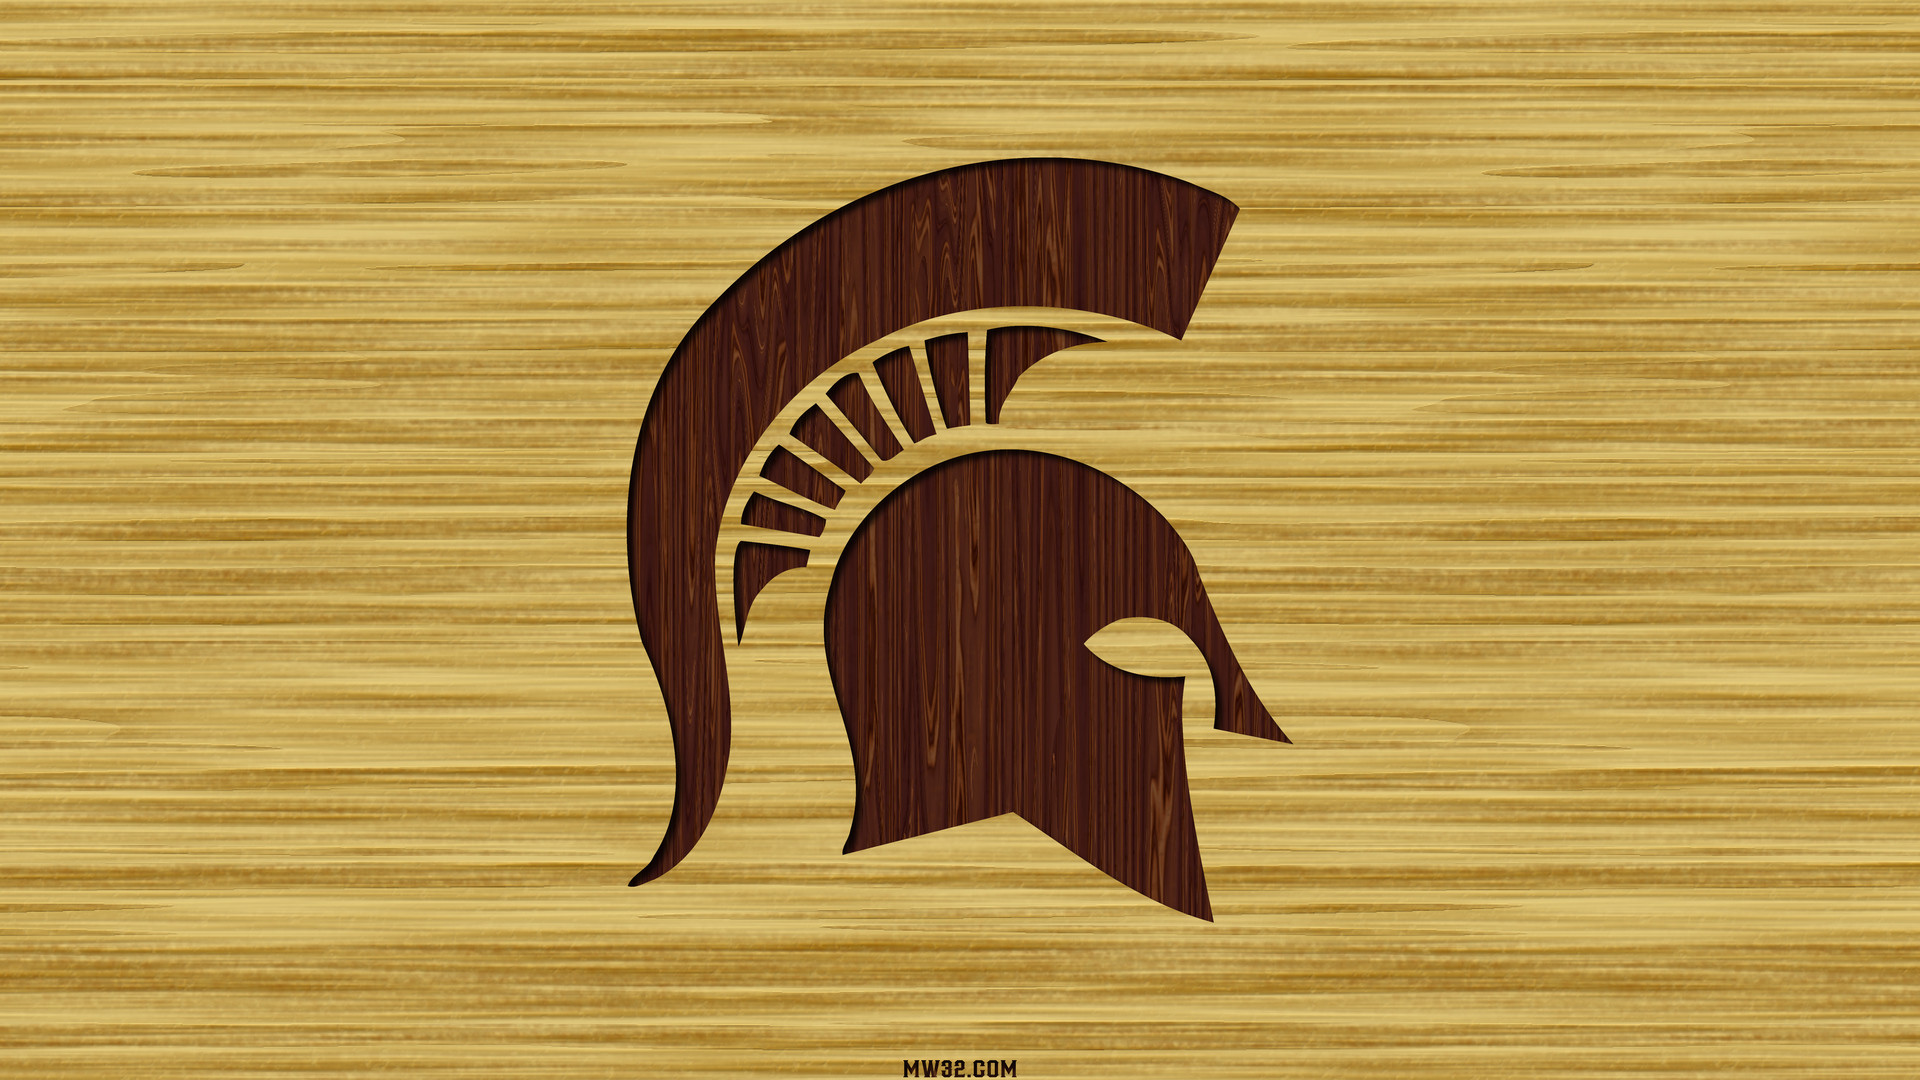 1920x1080 MICHIGAN STATE SPARTANS college football wallpaper | 1500x1500 ... 0 HTML  code. Source URL: http://www.mw32.com/%3Fp%